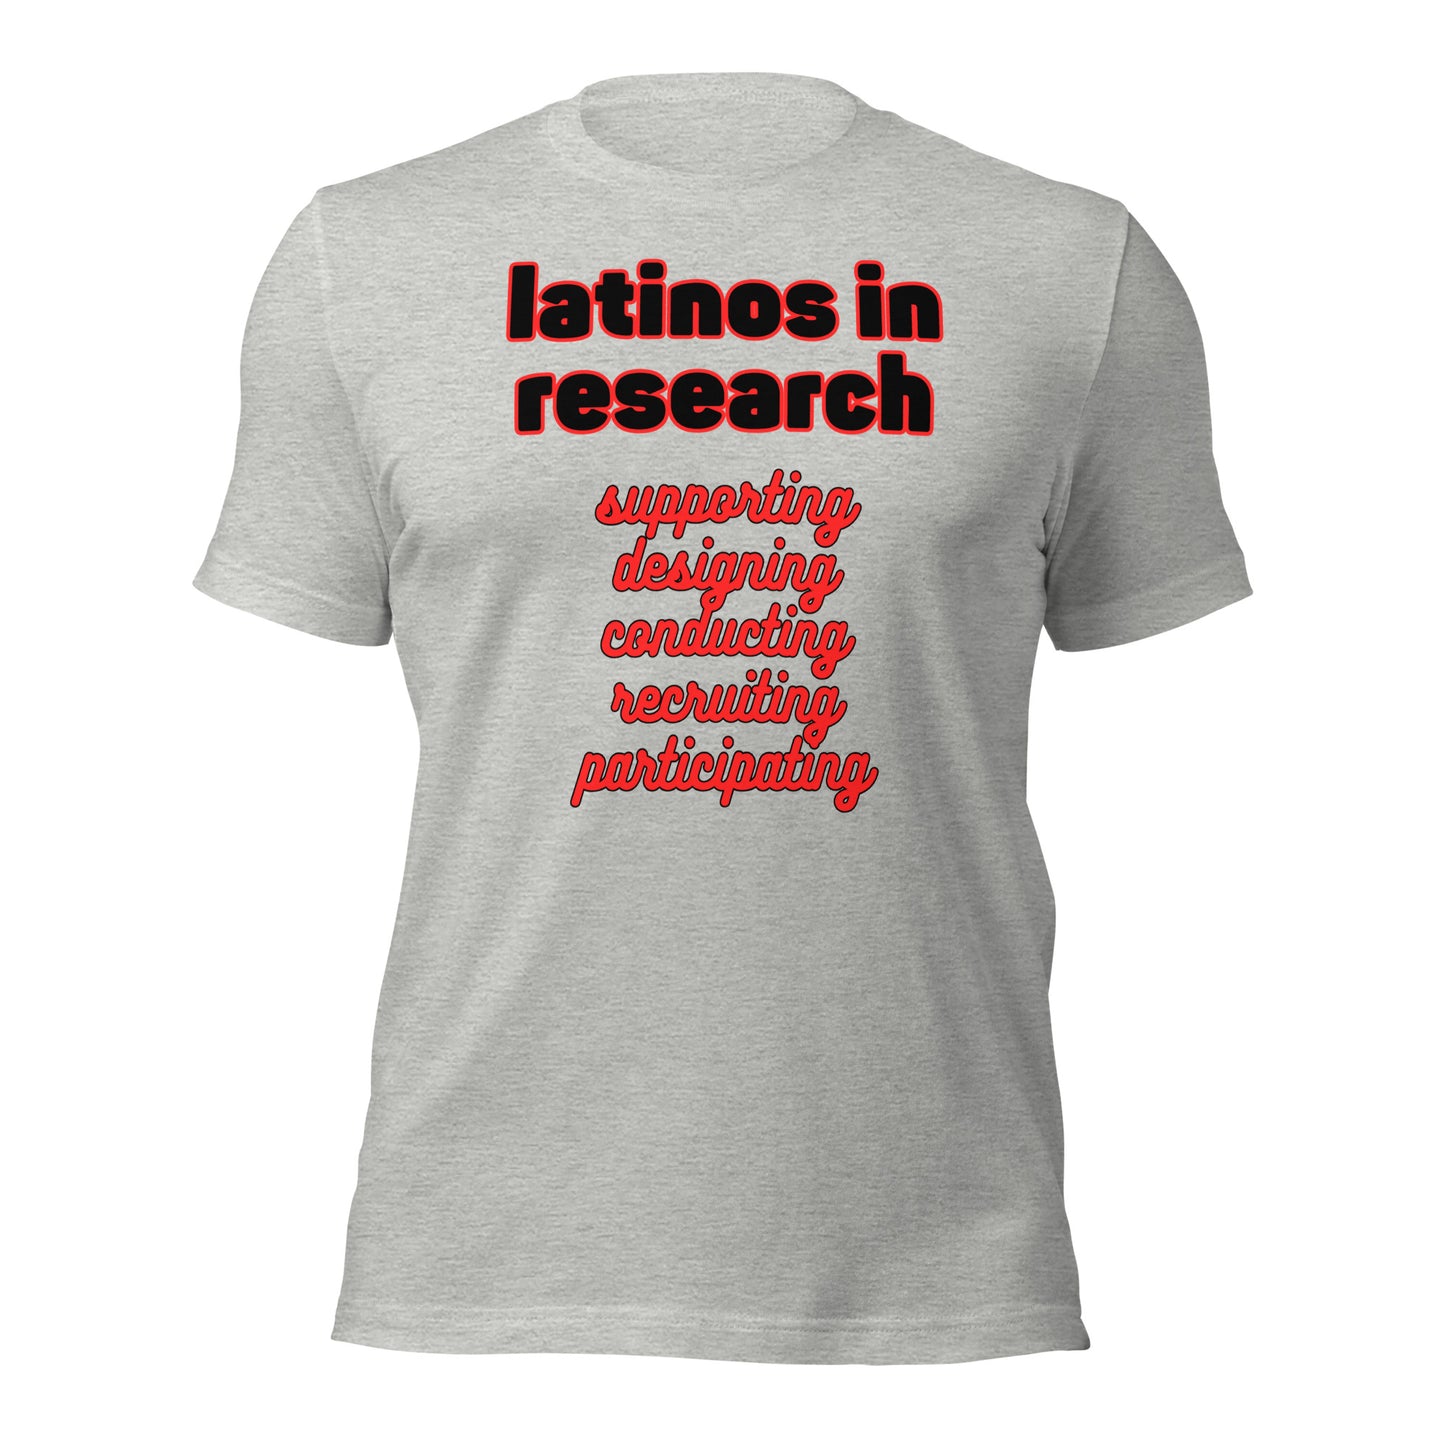 LATINOS in RESEARCH: Unisex t-shirt